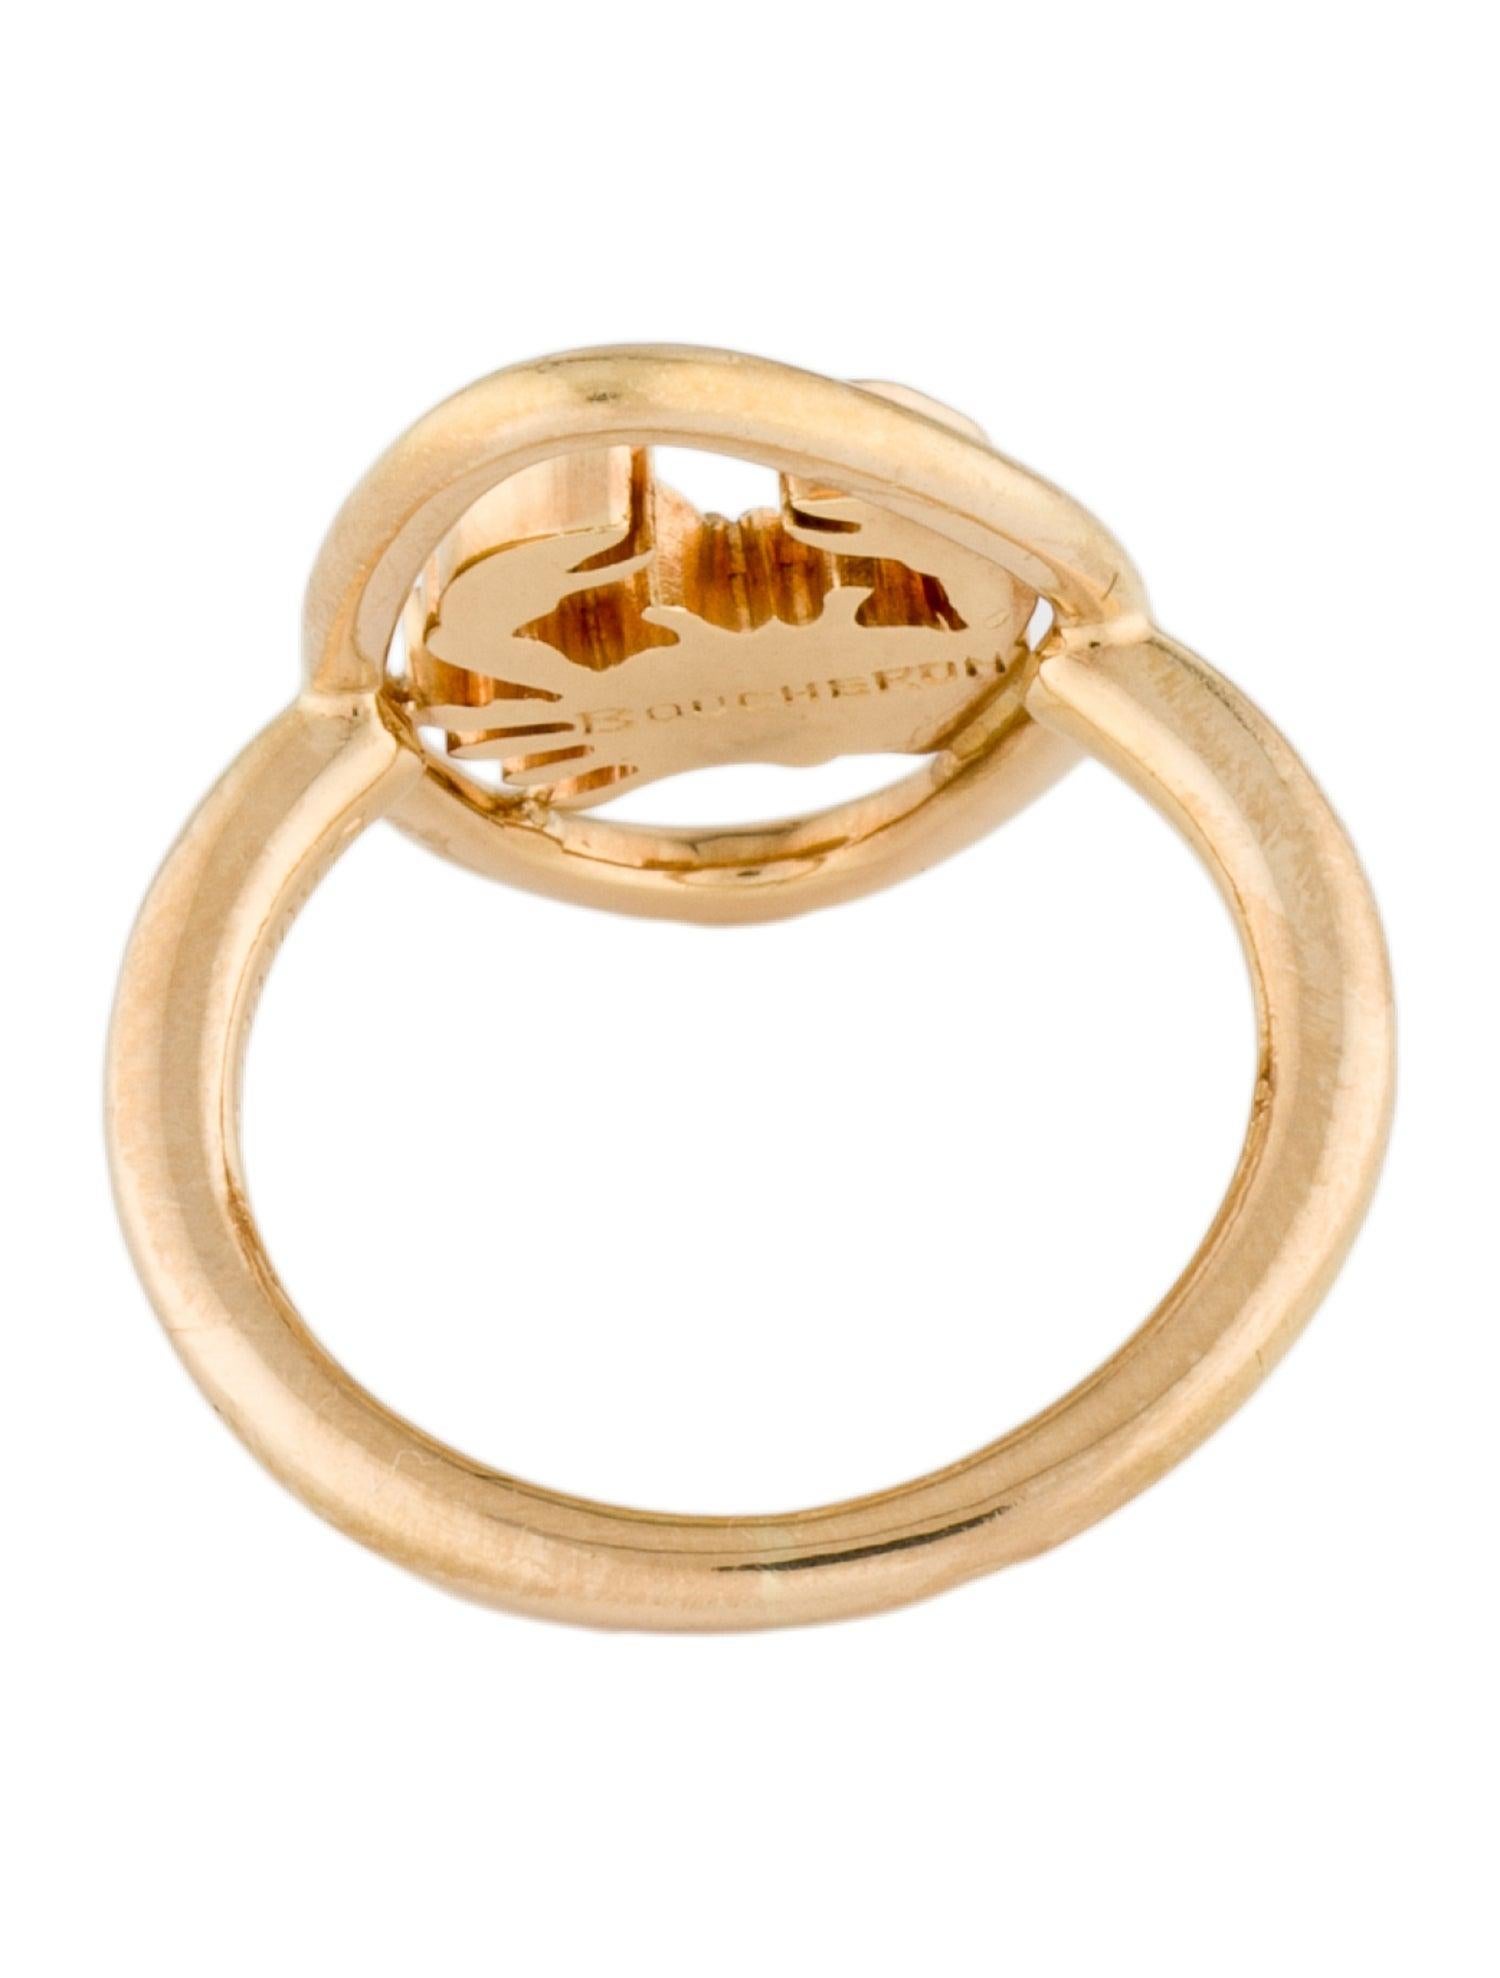 BOUCHERON PARIS 18k Yellow Gold Cancer Zodiac Ring Vintage Circa 1970s In Excellent Condition For Sale In Beverly Hills, CA